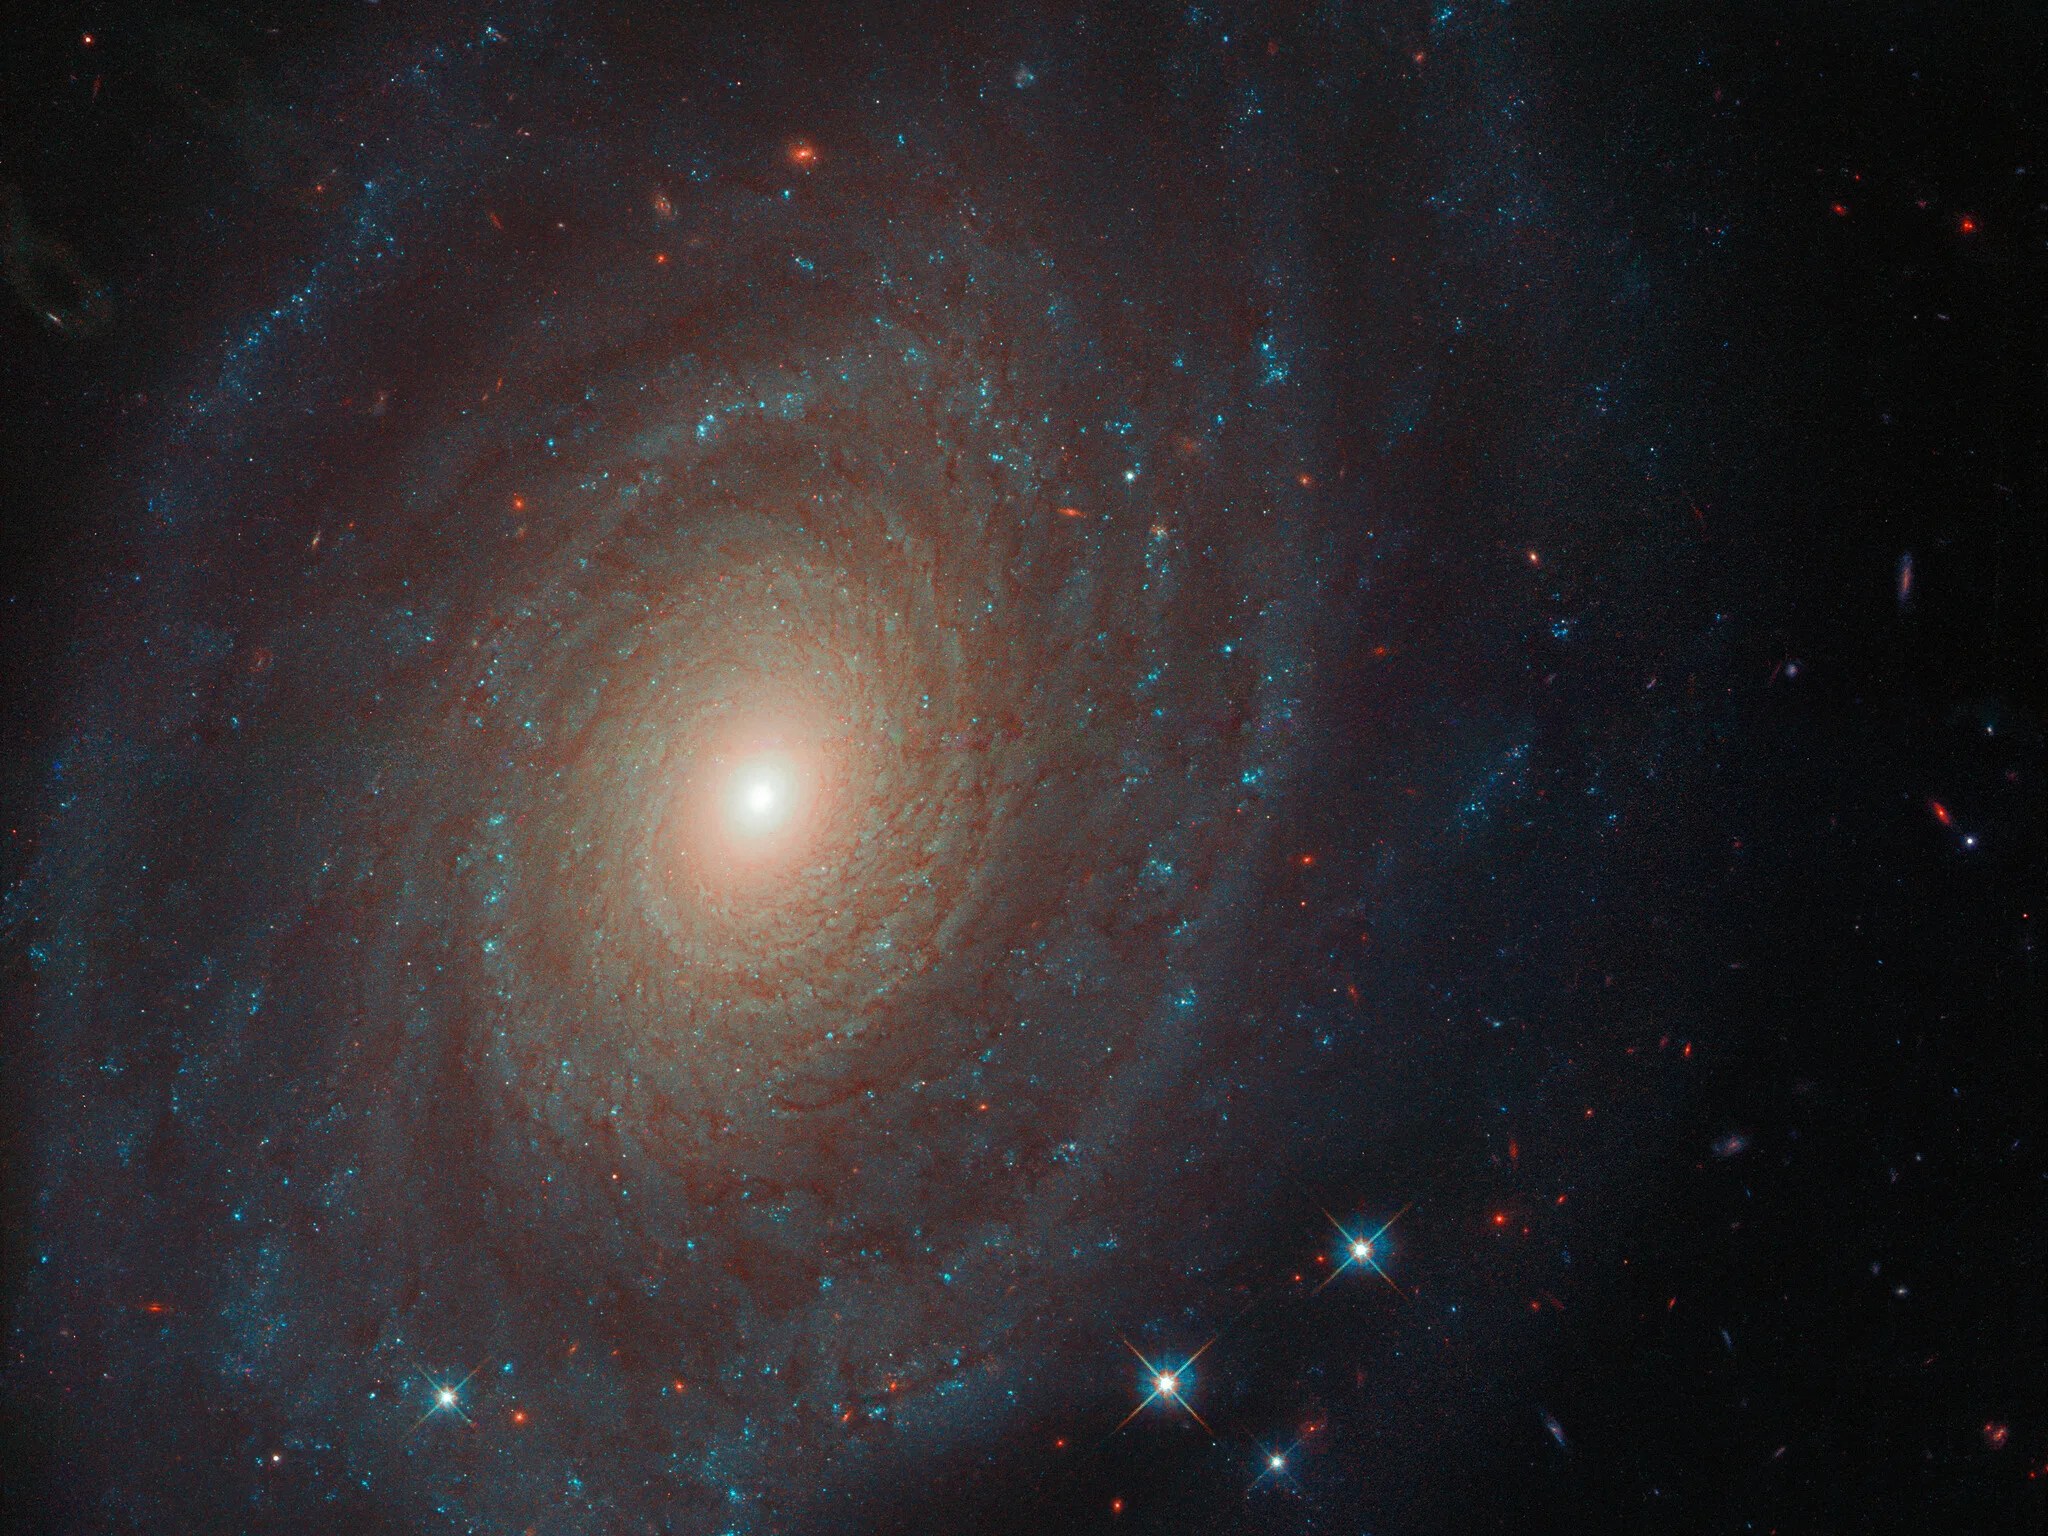 Bright spiral galaxy ngc 691 as seen by hubble